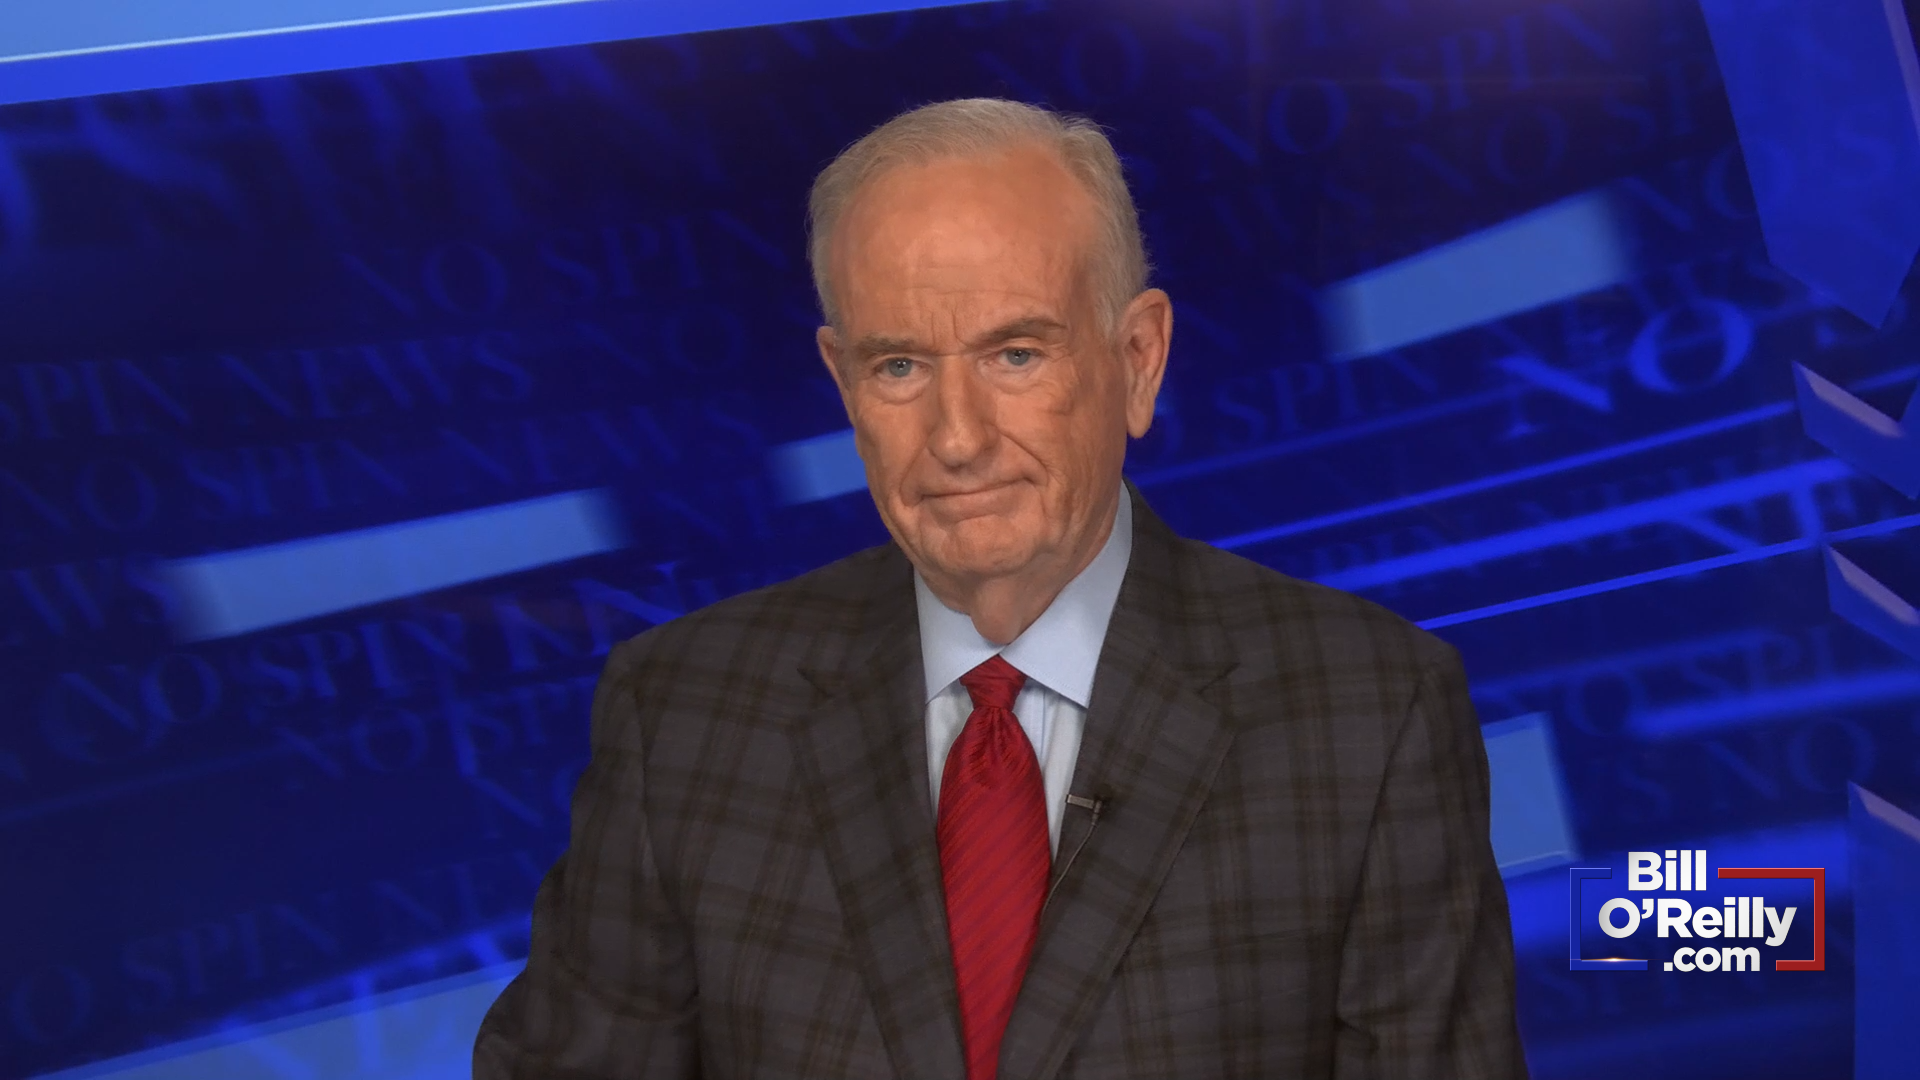 O'Reilly Calls for a Complete Overhaul of the FBI